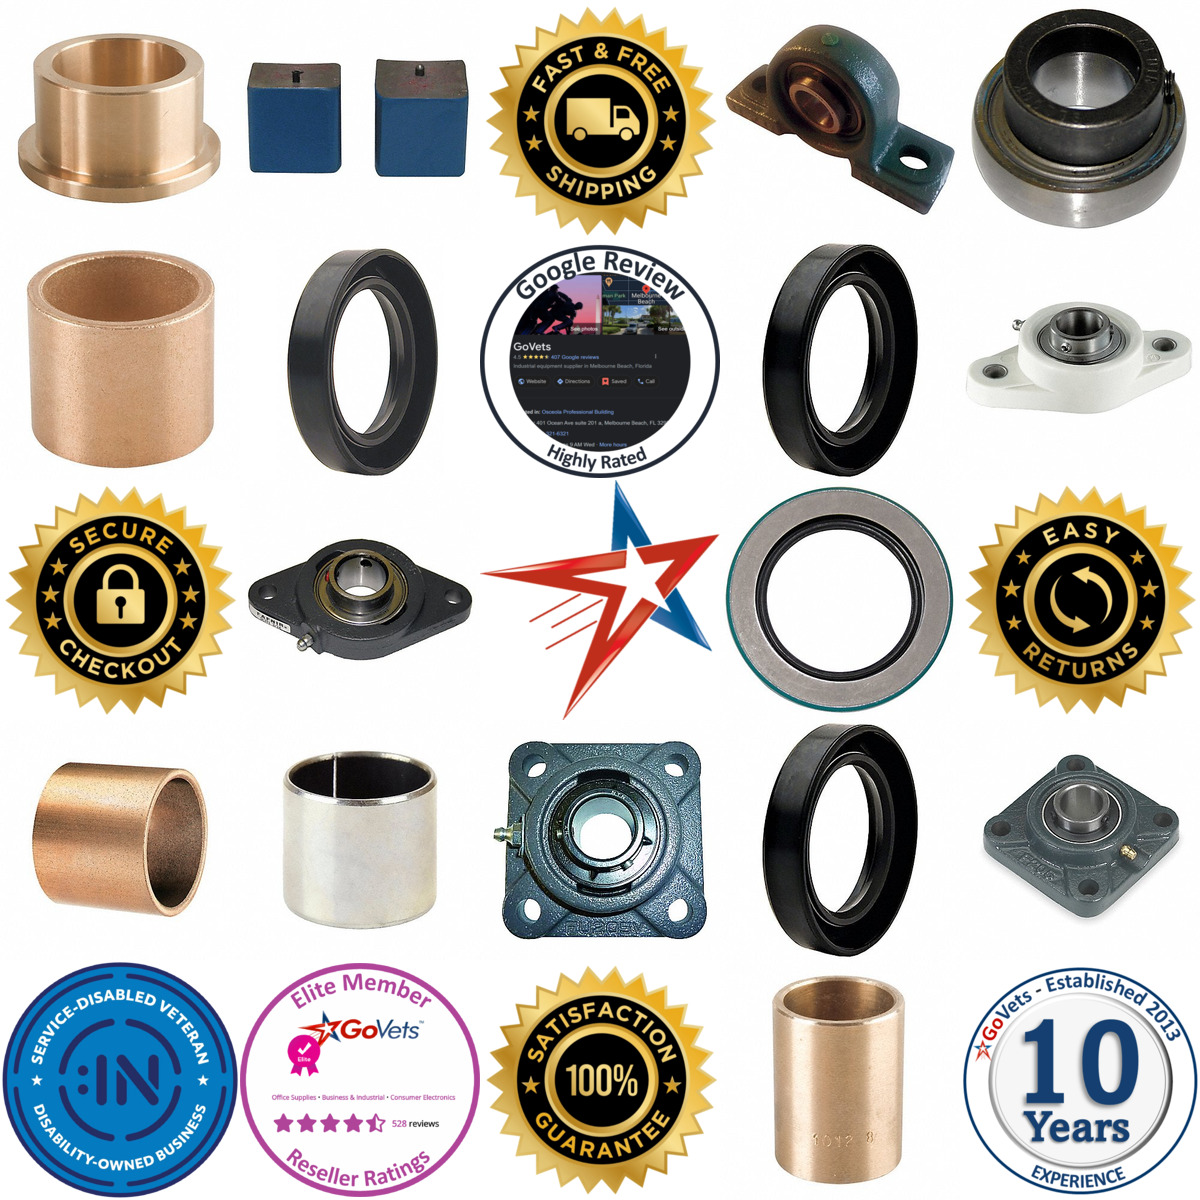 A selection of Bearings products on GoVets